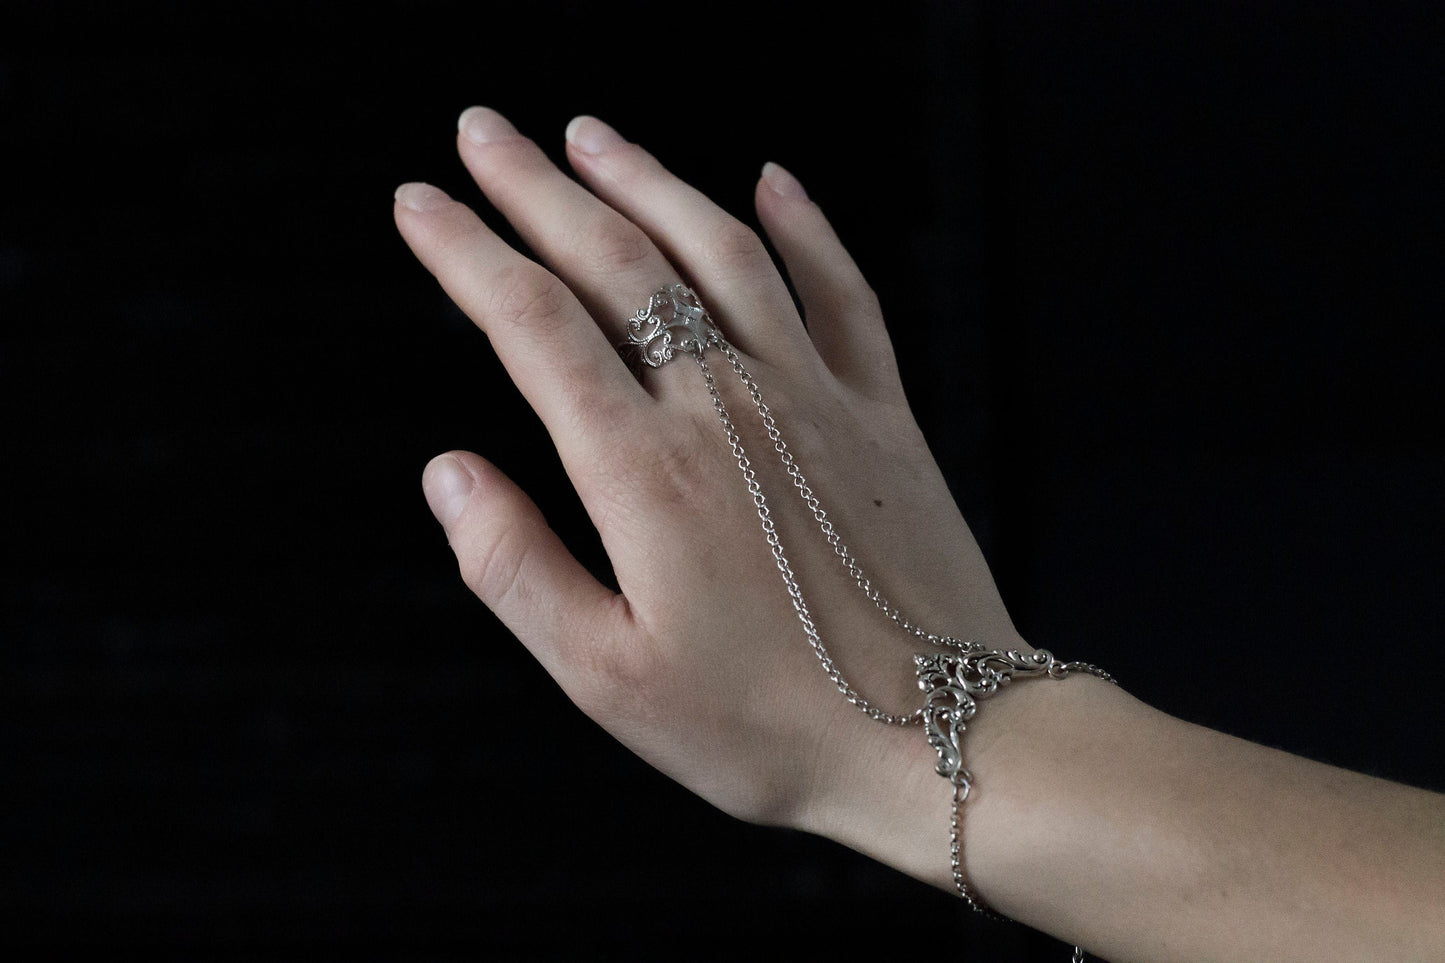 Elegant Myril Jewels hand chain bracelet ring displayed on a slender hand, portraying dark avant-garde luxury. The intricate silver filigree design, inspired by Neo Gothic floral style, cascades from a delicate ring down to a matching wrist cuff, creating a sophisticated, gothic-chic look. This jewelry is perfect for Halloween, everyday wear for the minimalist goth, or as an eye-catching accessory for rave parties and festivals.